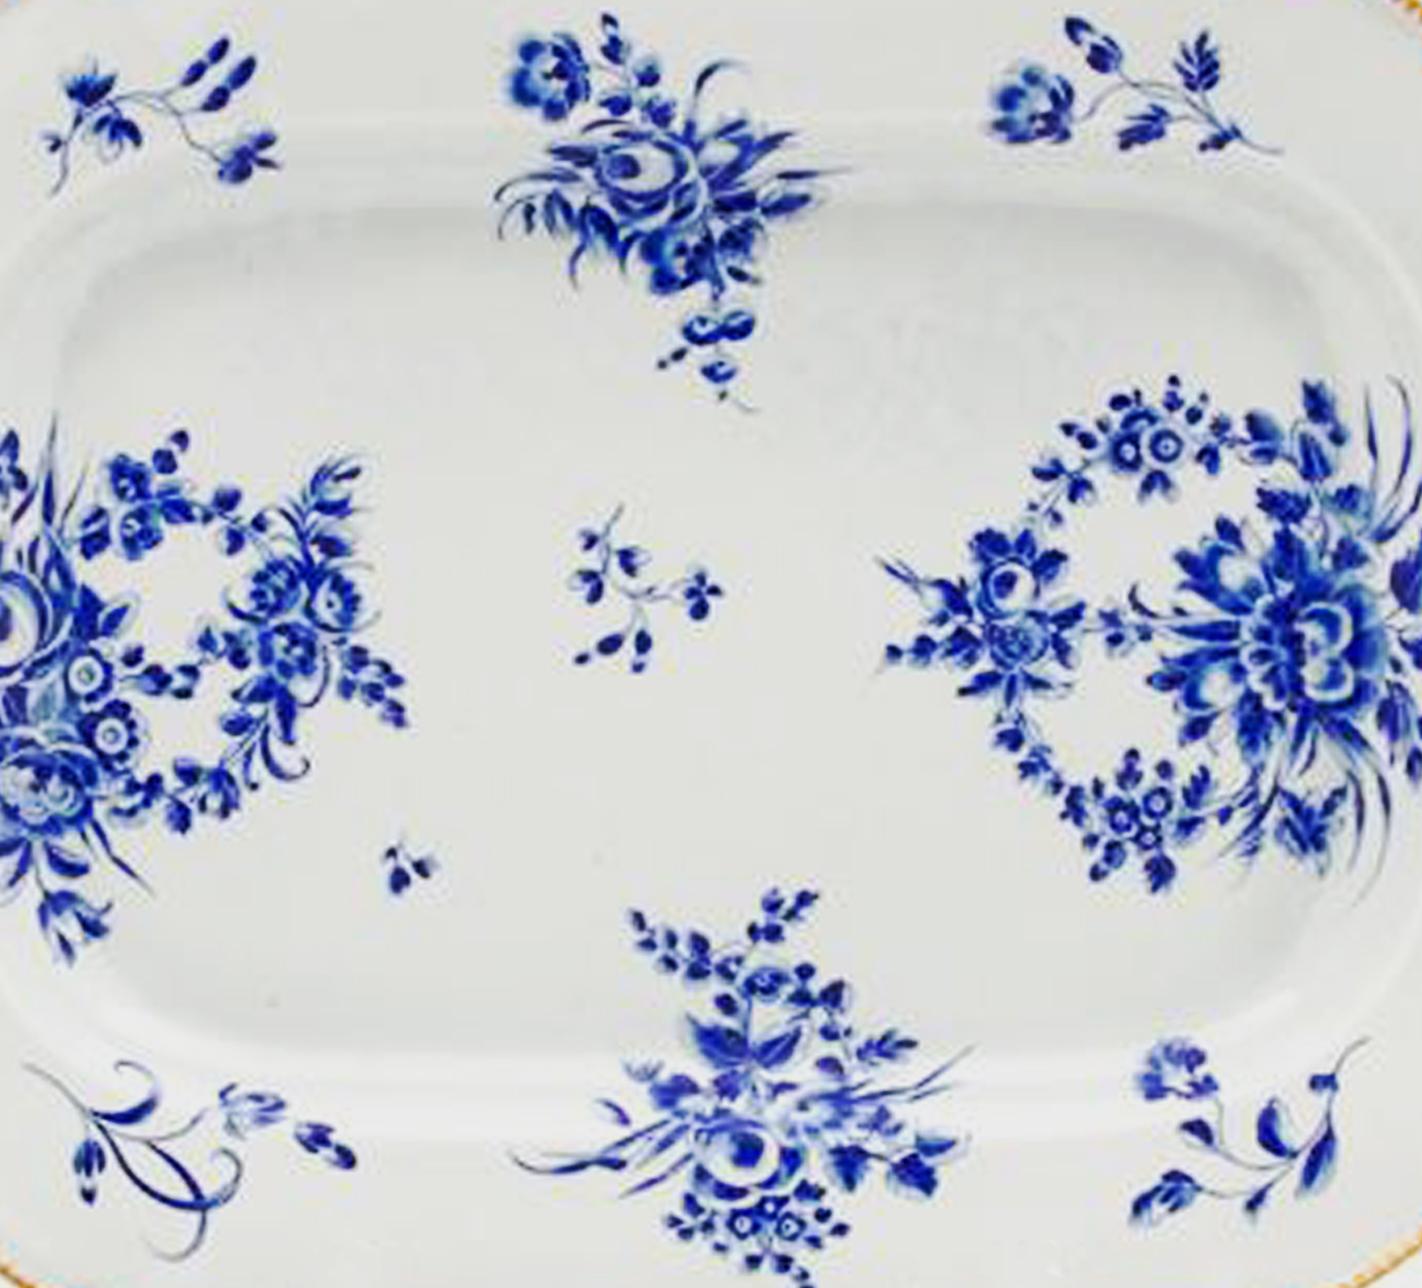 First Period Worcester dry blue enamel large dish or platter,
(Dr. Wall),
circa 1768-1970.

The large First Period Worcester porcelain dish with canted corners is painted with flowers in dry blue.

John Sandon mentions that blue enamel was a